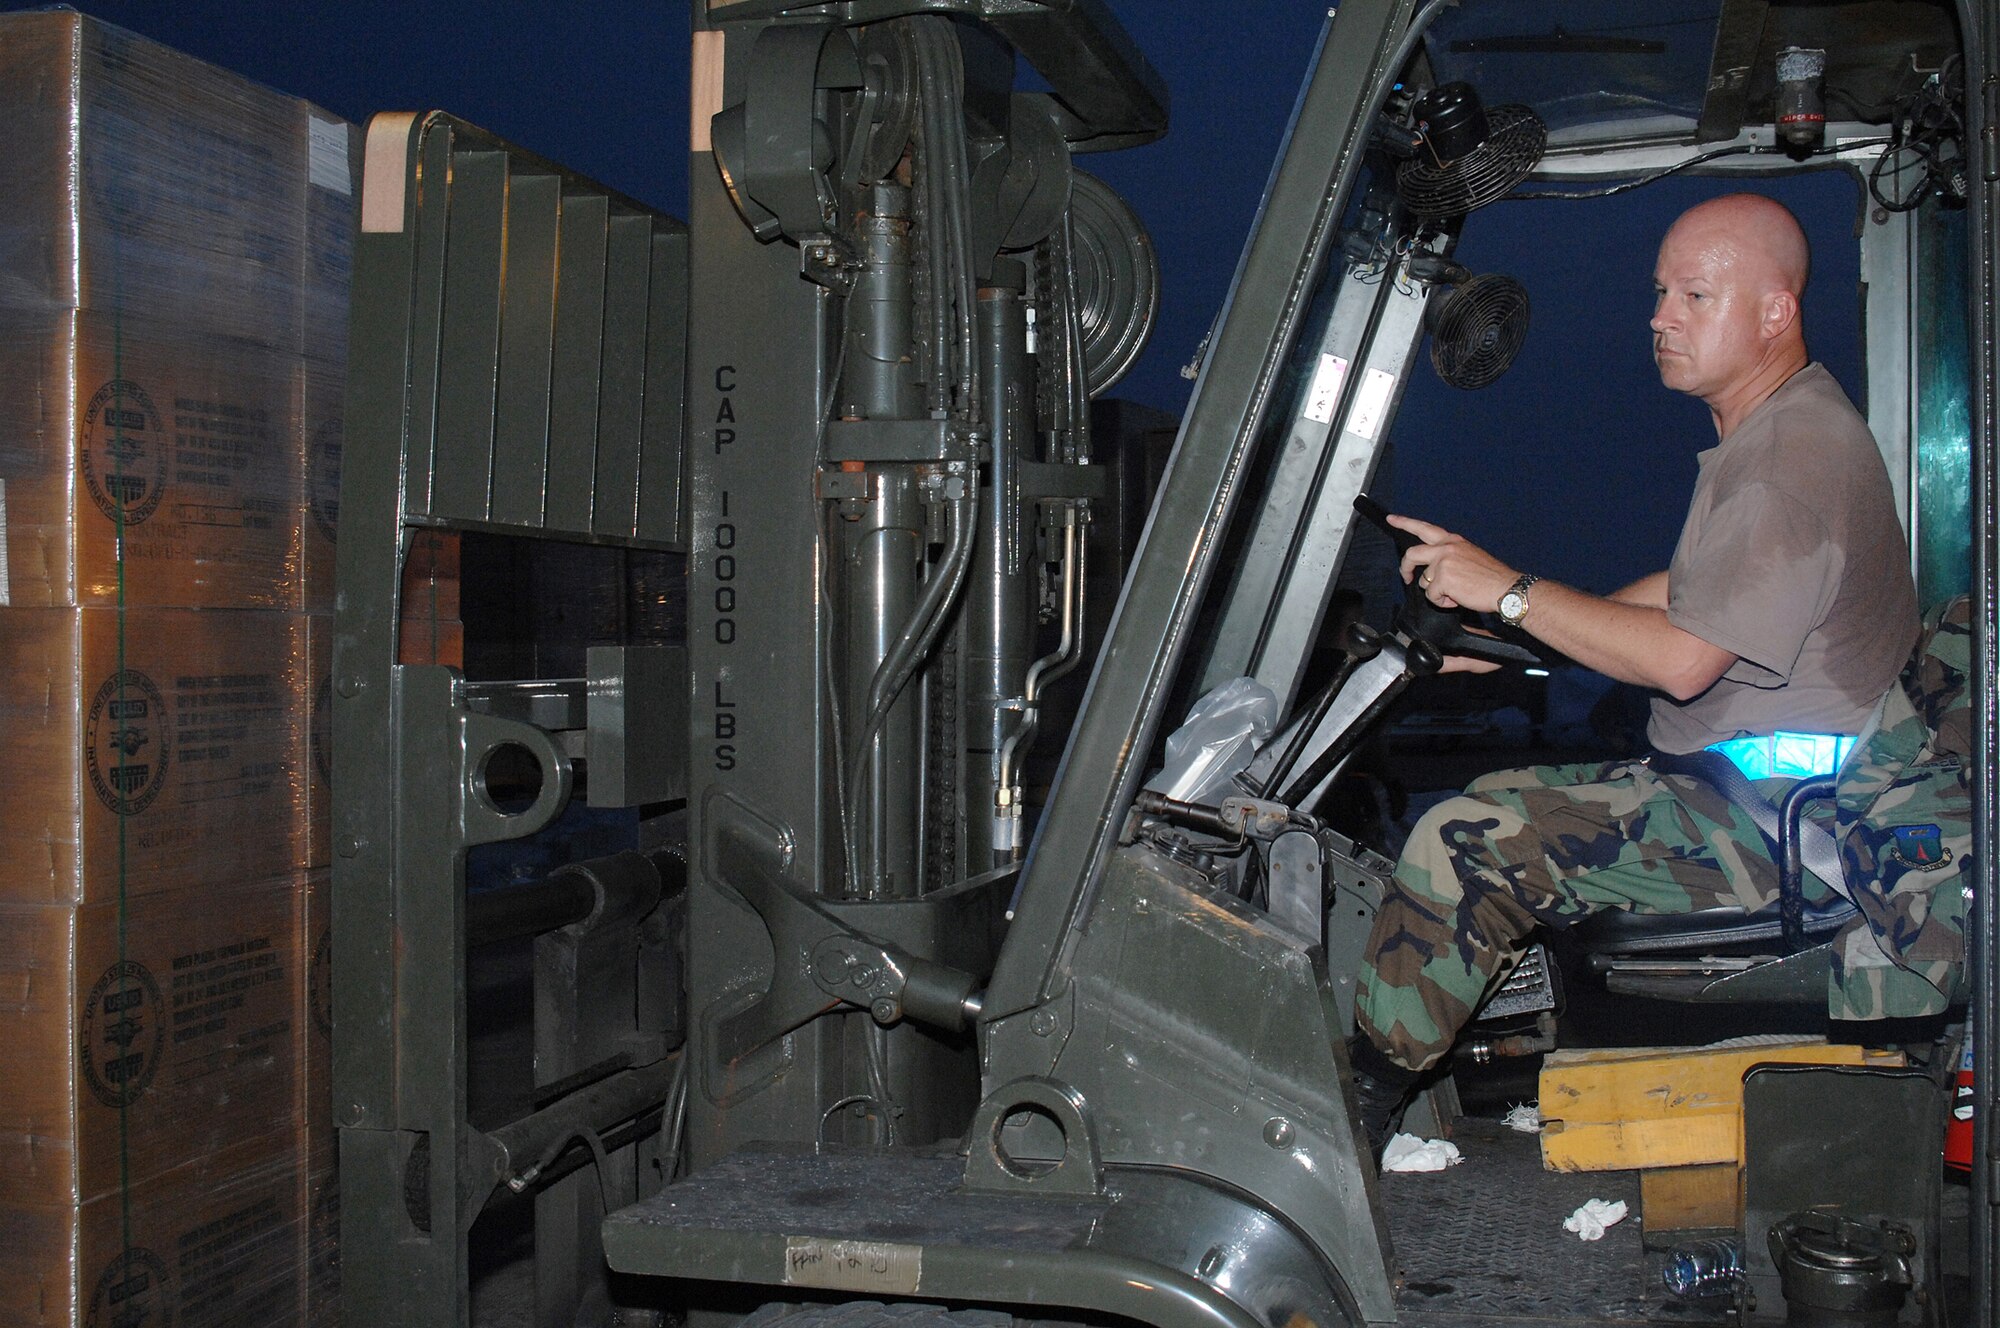 Utapao, Thailand - Master Sgt James Werner, 36th Mobility Response Squadron, operates a forklift during the downloading of humanitarian relief supplies from a Boeing 747 commercial airplane for delivery into Burma May 16. MSgt Werner is one of 45 members forward deployed from Andersen AFB, Guam trained and prepared to respond quickly to disasters such as Cyclone Nargis. (USAF photo/Senior Airman Sonya Croston)(RELEASED)